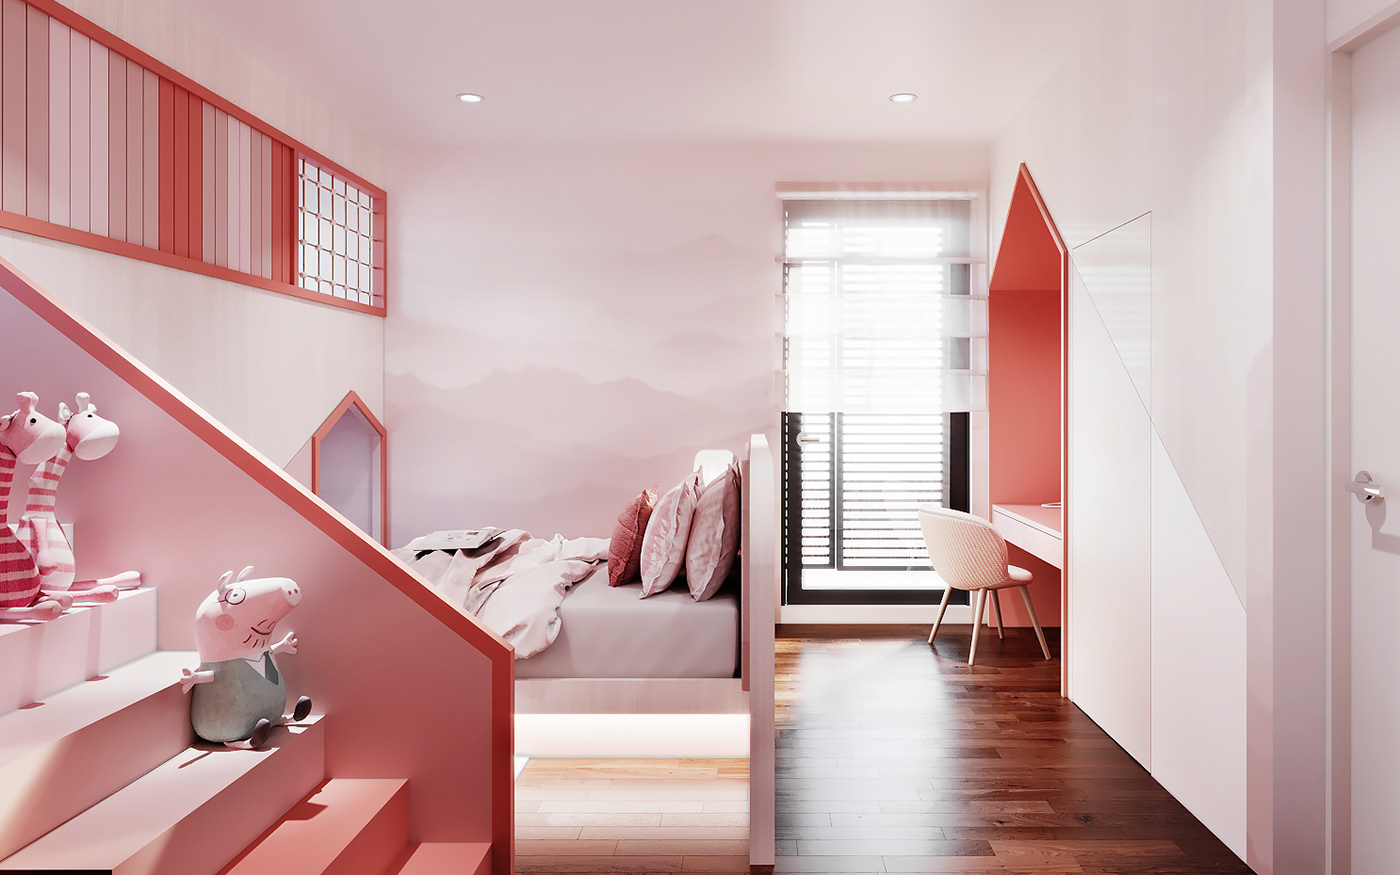 2020 interior design feature wall design fun and playful girls bedroom  Kids Playroom pink bedroom staircase design study bedroom